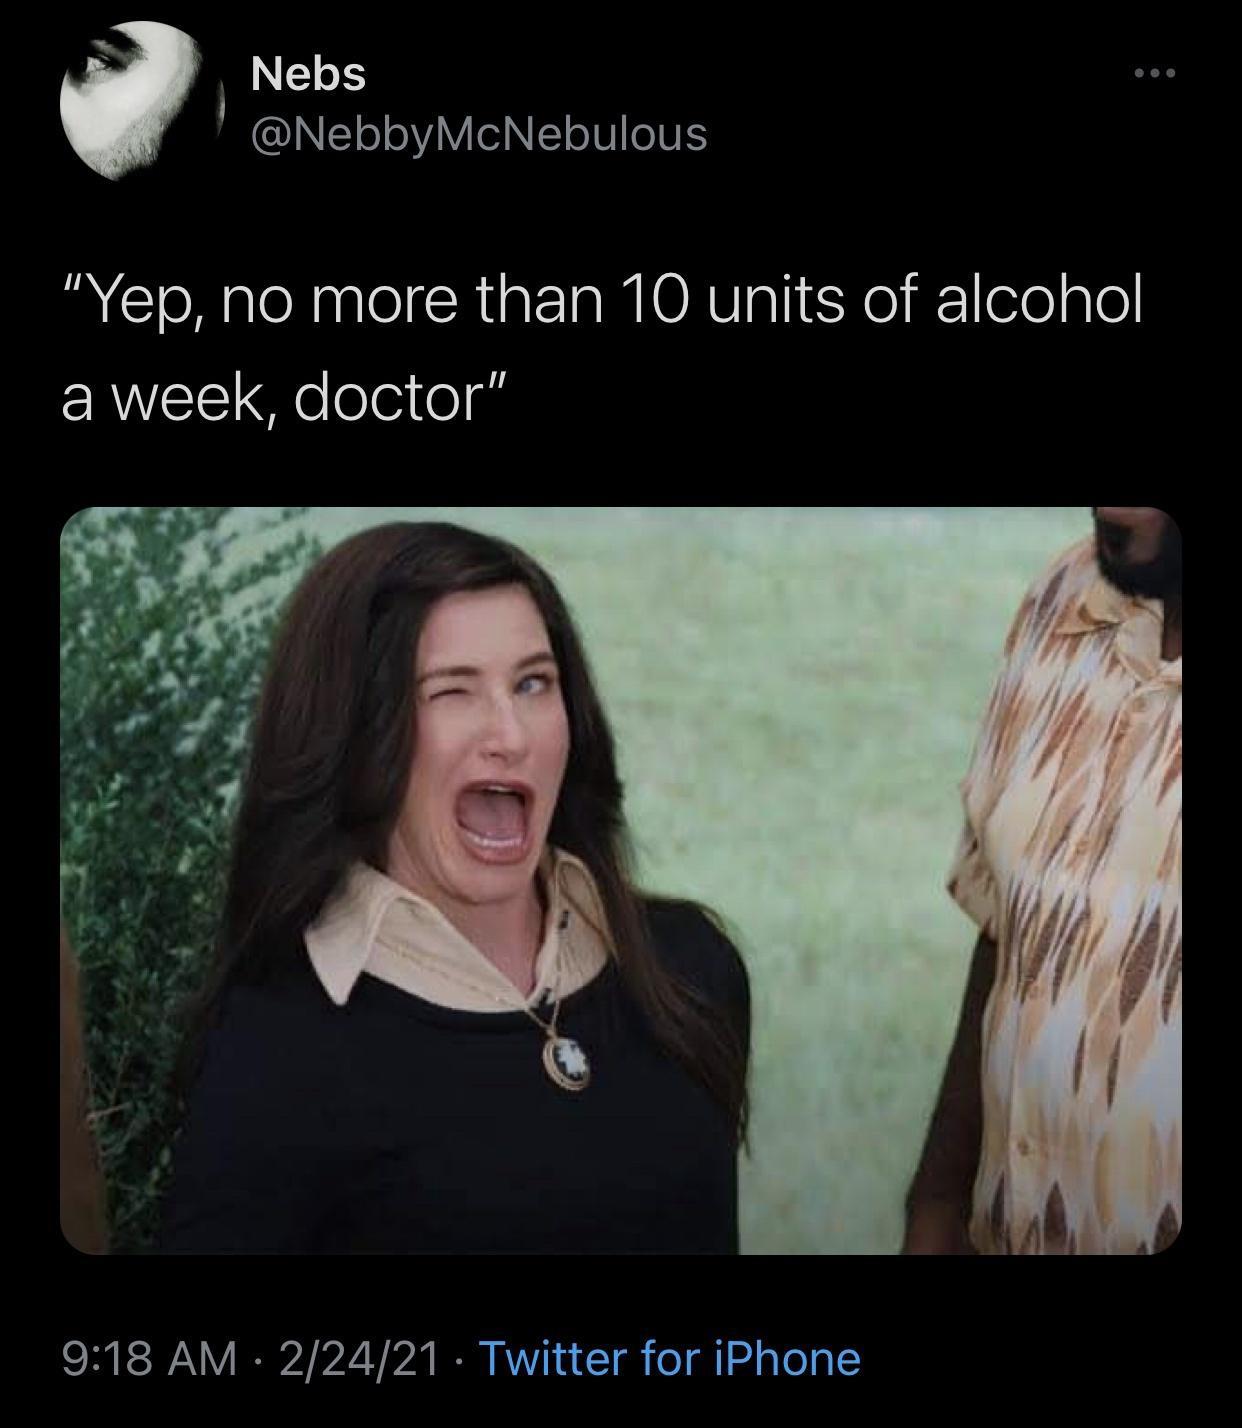 me telling my computer will update tomorrow - Nebs "Yep, no more than 10 units of alcohol a week, doctor" 22421 Twitter for iPhone